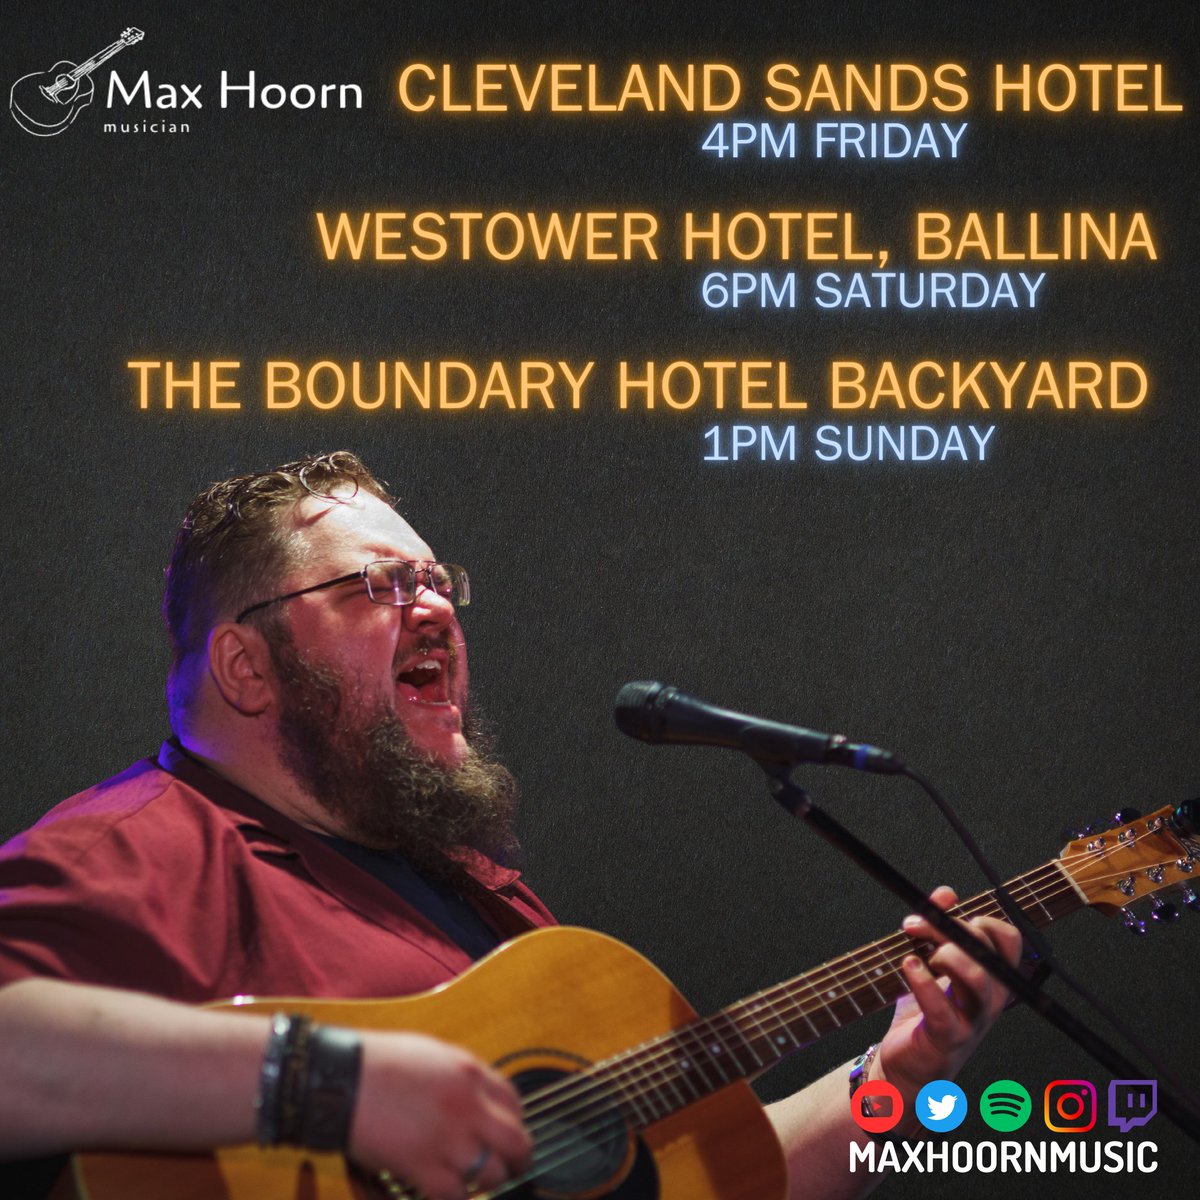 Gig guide this weekend. Friday - Cleveland Sands Hotel 4pm Saturday - Westower Hotel, Ballina 6pm Sunday - Boundary Hotel - Backyard, 1pm #music #gigguide #whatson #livemusic #loopy #supportlivemusic #livemusic #musician